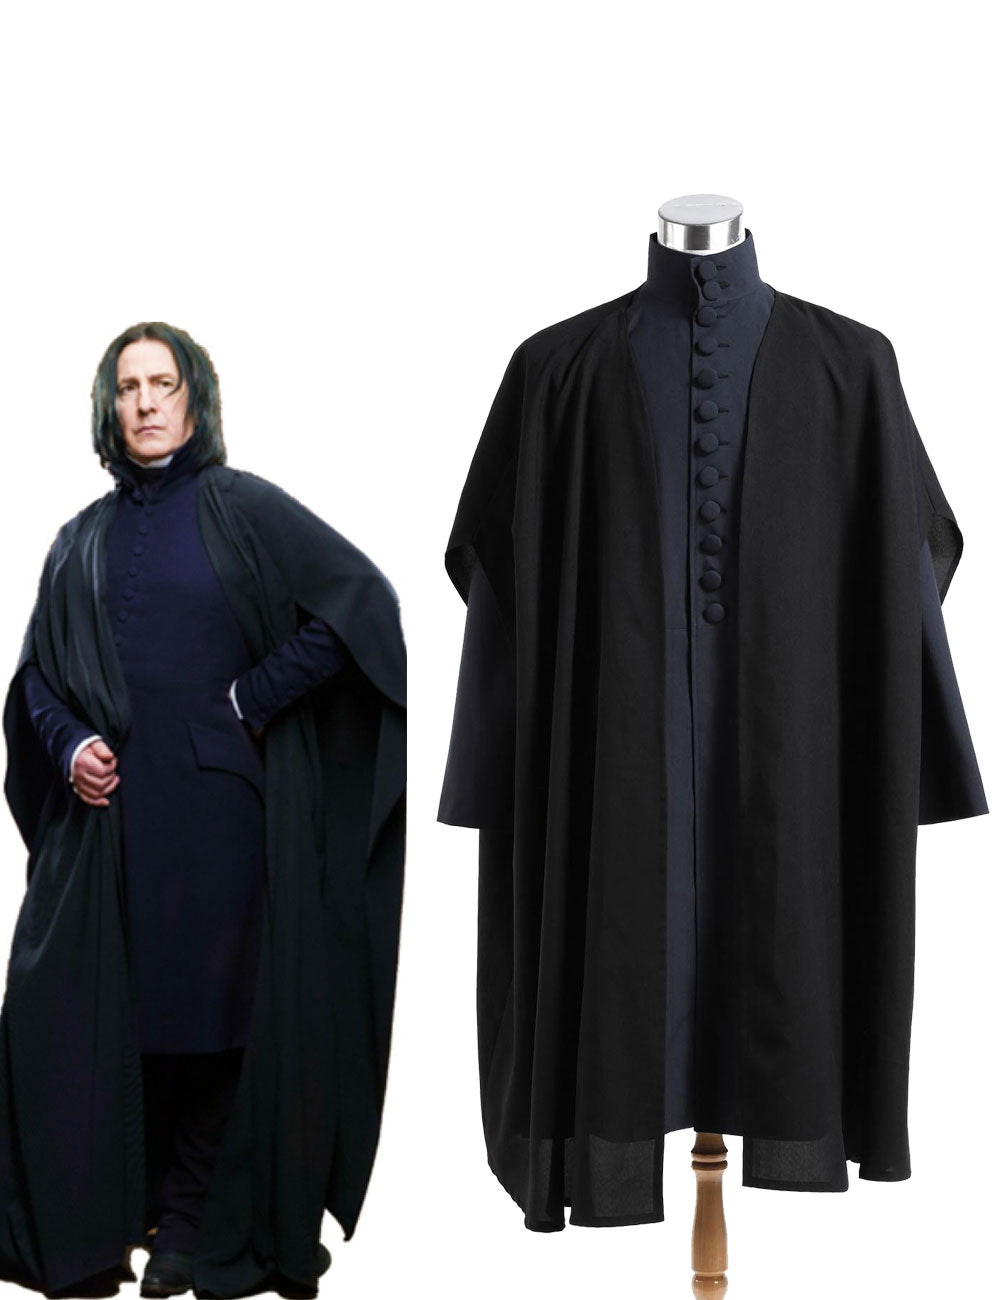 Harry Potter Deathly Hallows Severus Snape Coat Cosplay Costume Blue Version - ACcosplay